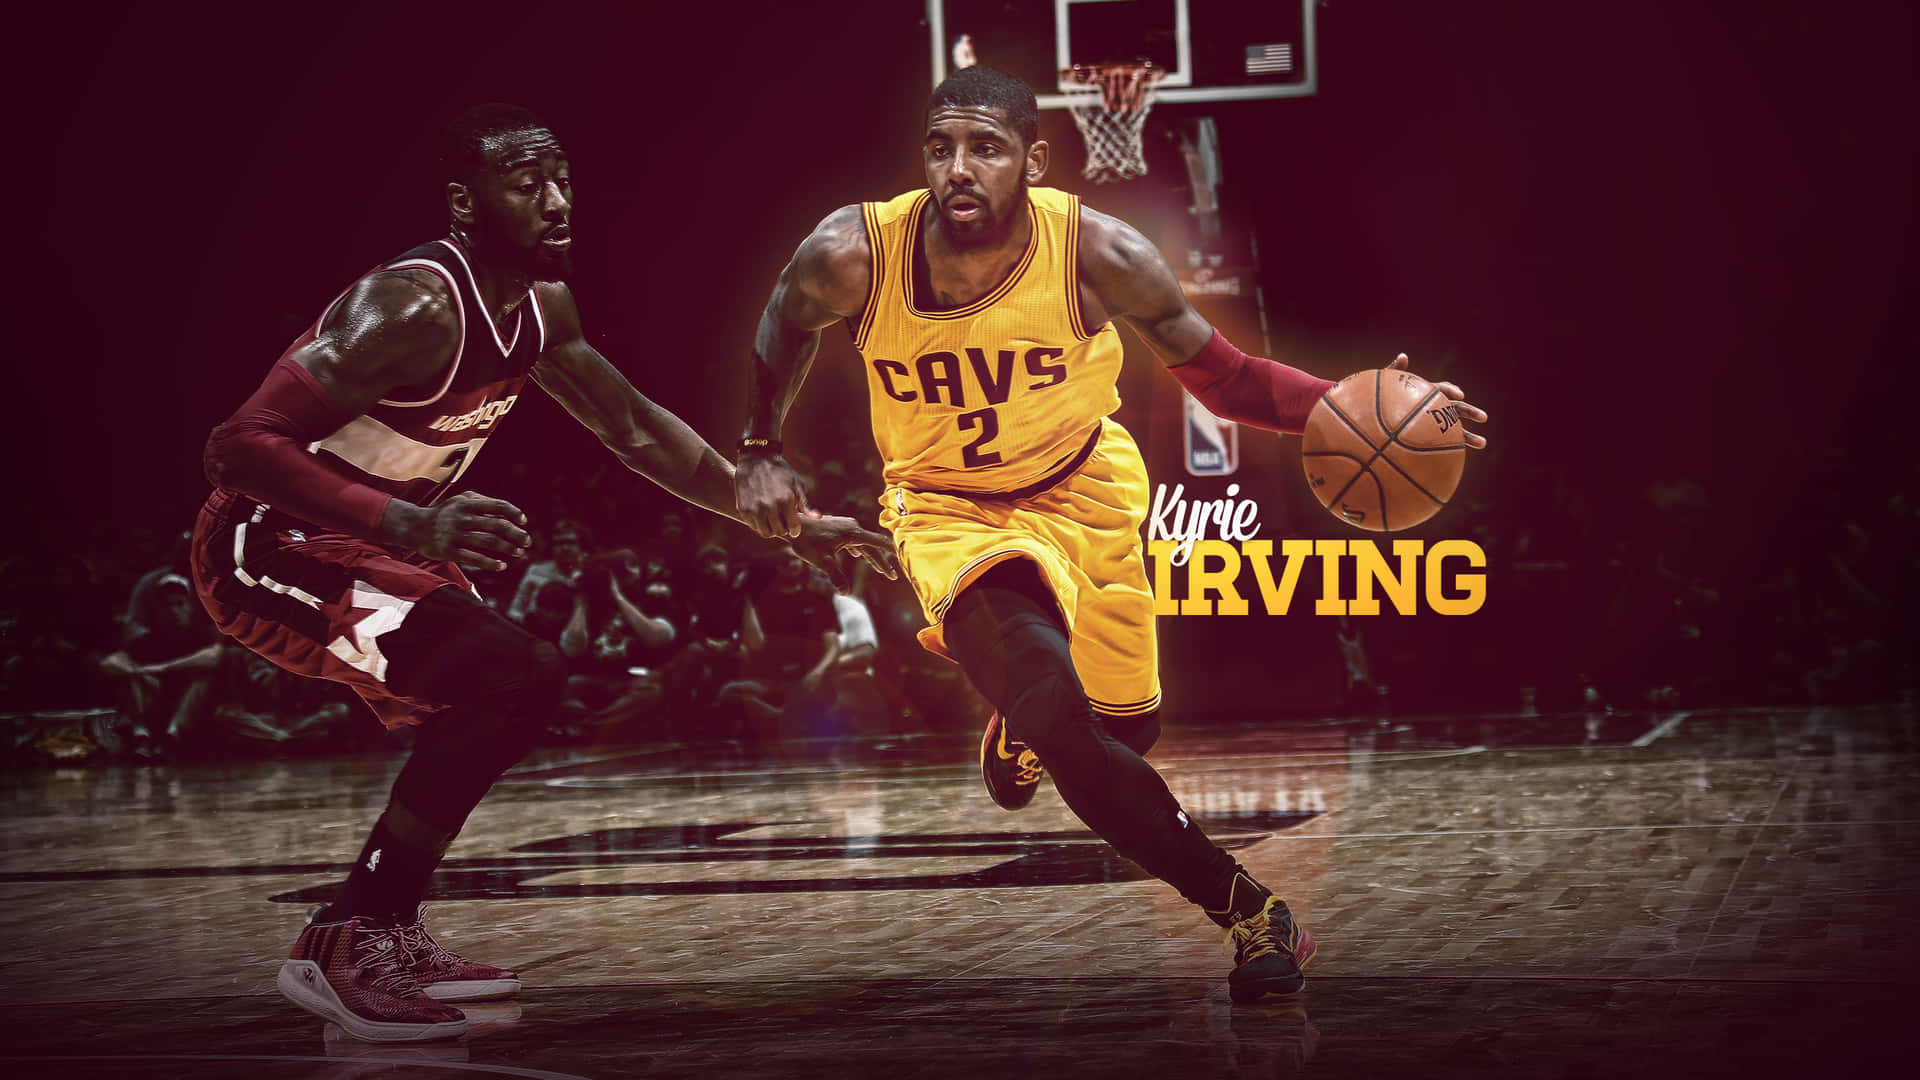 Kyrie Irving pauses for a quick cool-down after a intense training session. Wallpaper